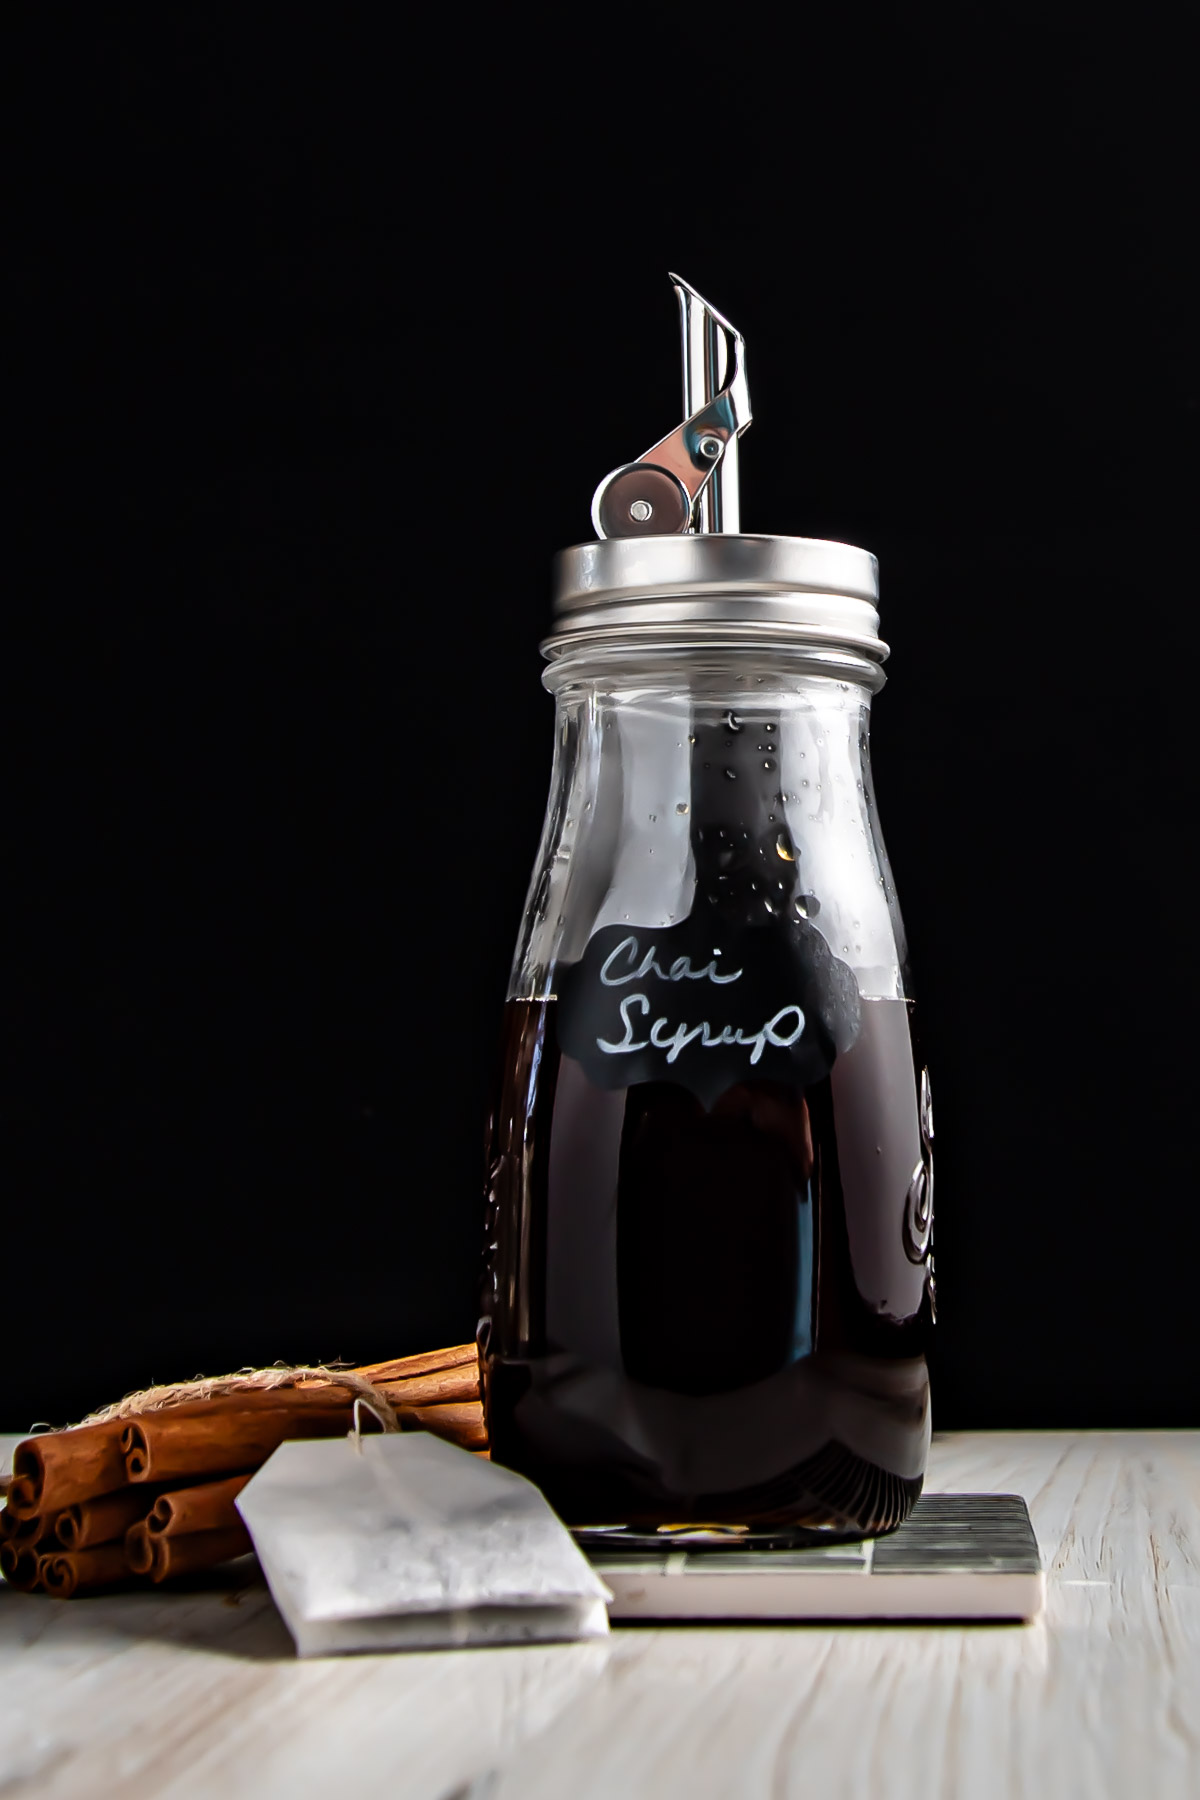 Bottle of chai tea syrup